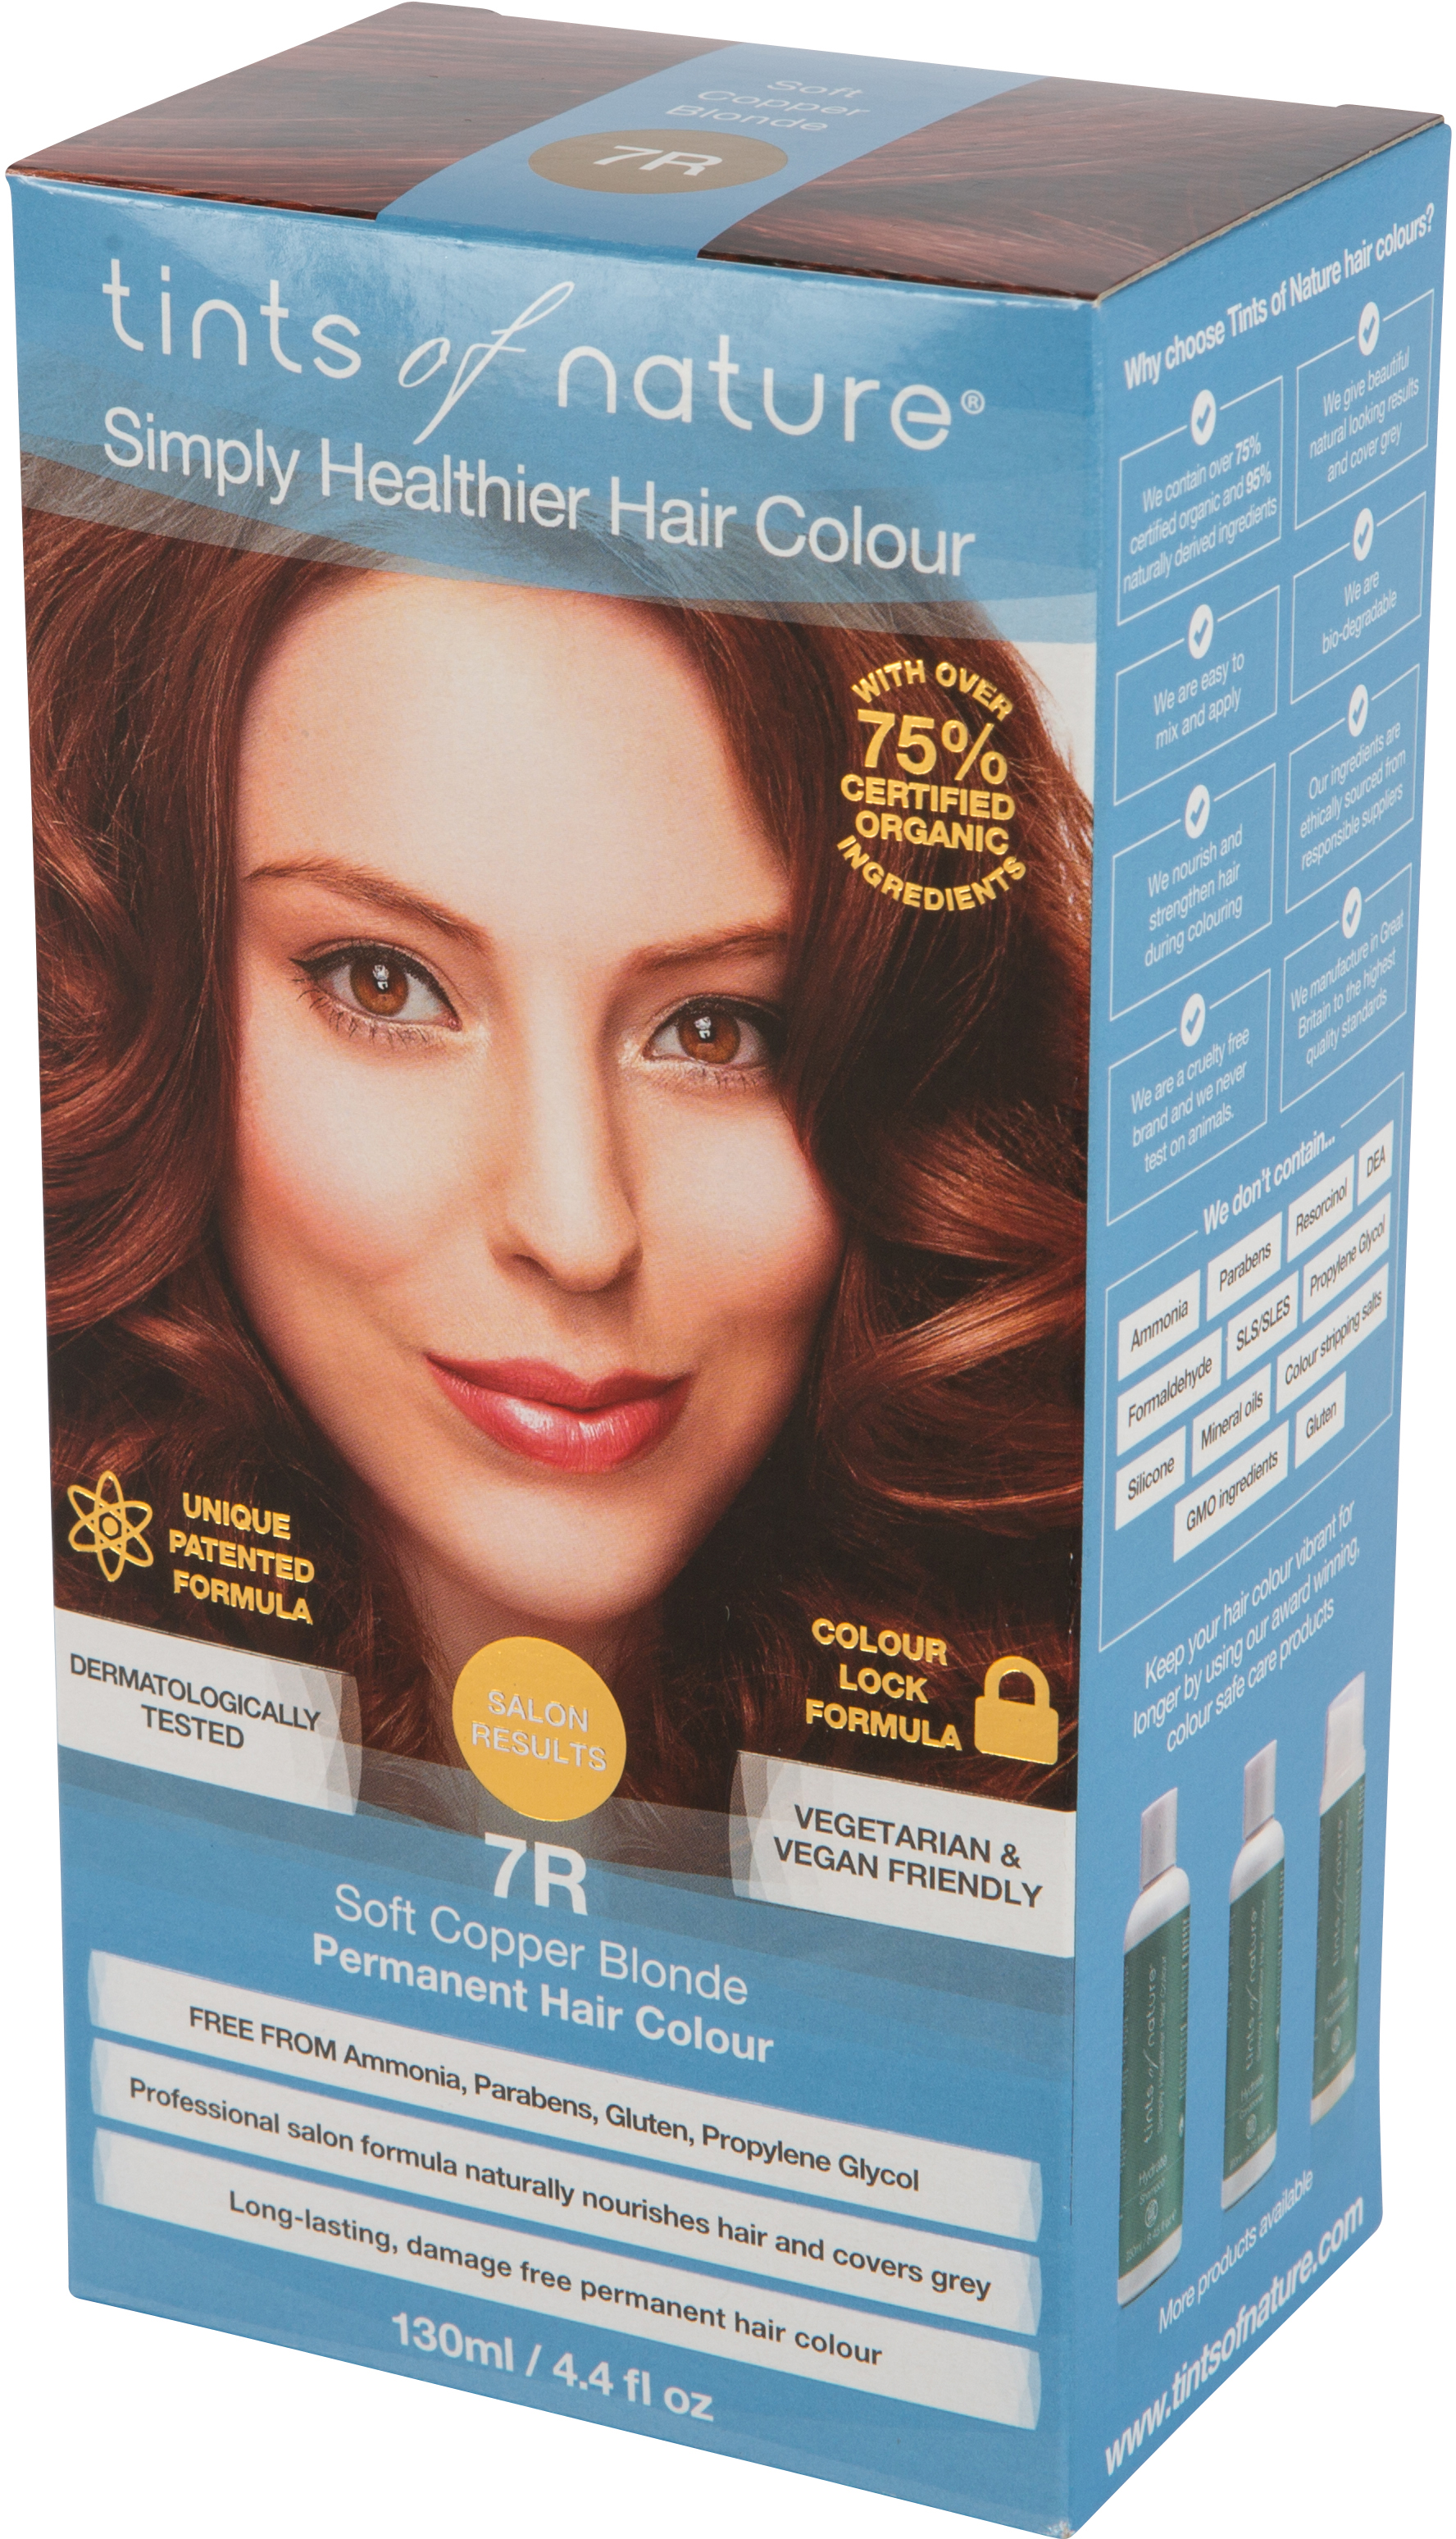 Tints of Nature Soft Copper Blonde 7R |